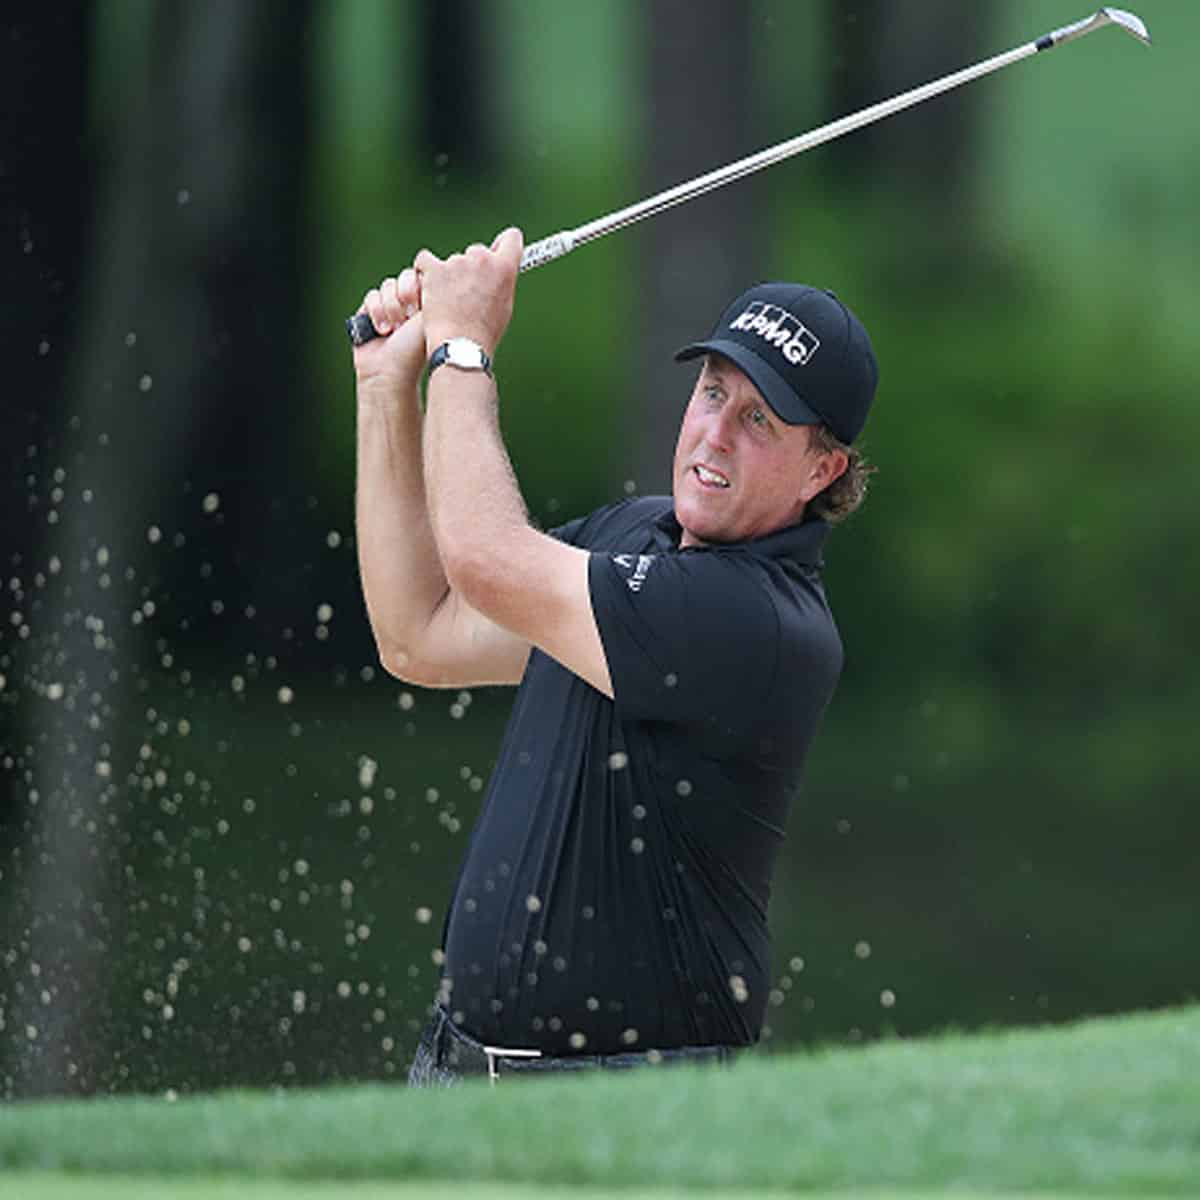 Phil Mickelson hits from a bunker during the fourth round of the PGA Championship